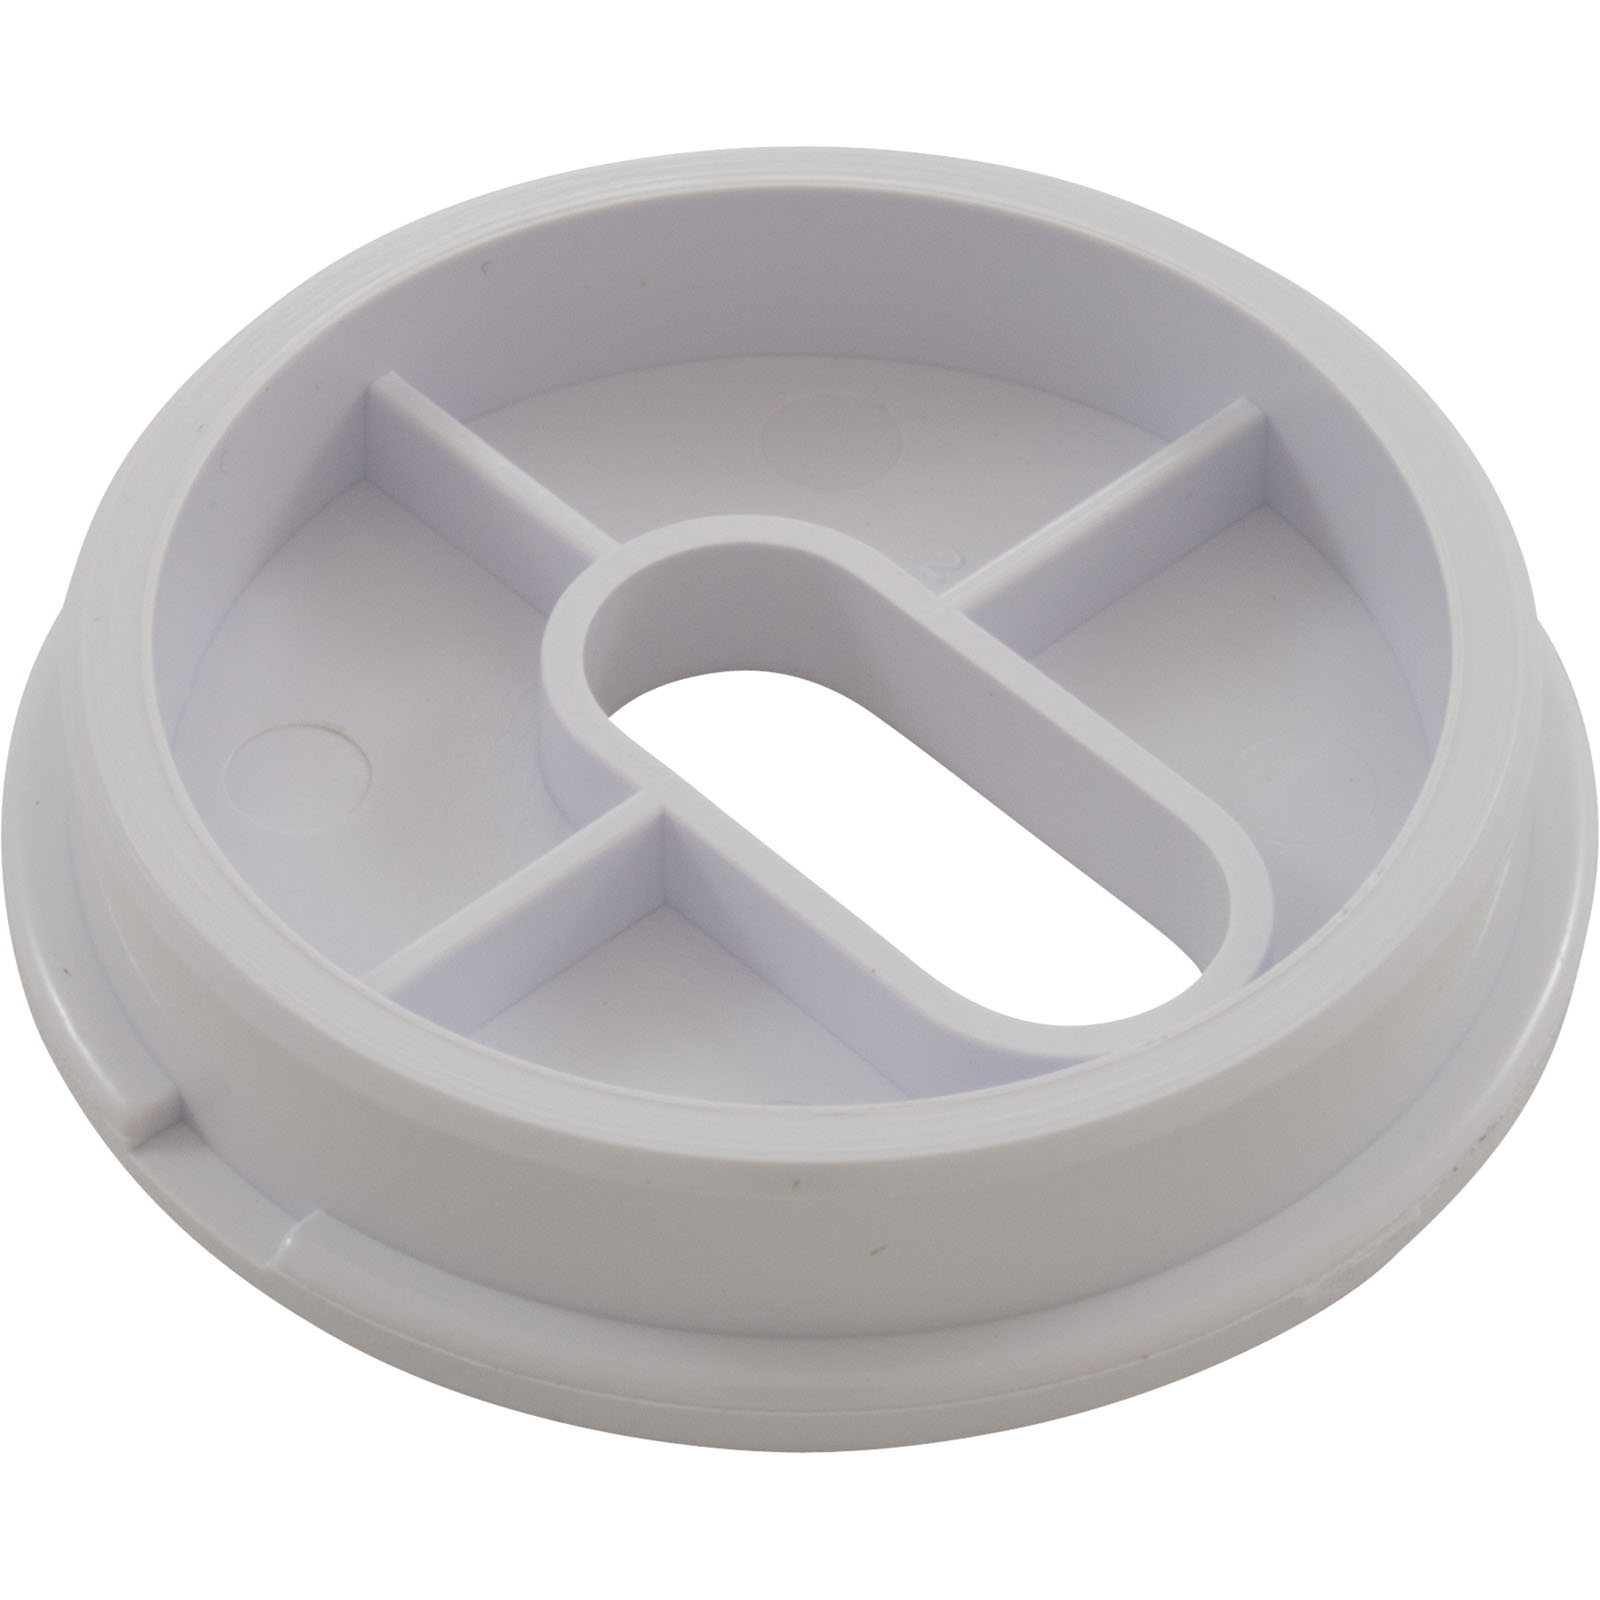 Picture of 25597-000-020 Deck Jet (J-Style) Round Cap White